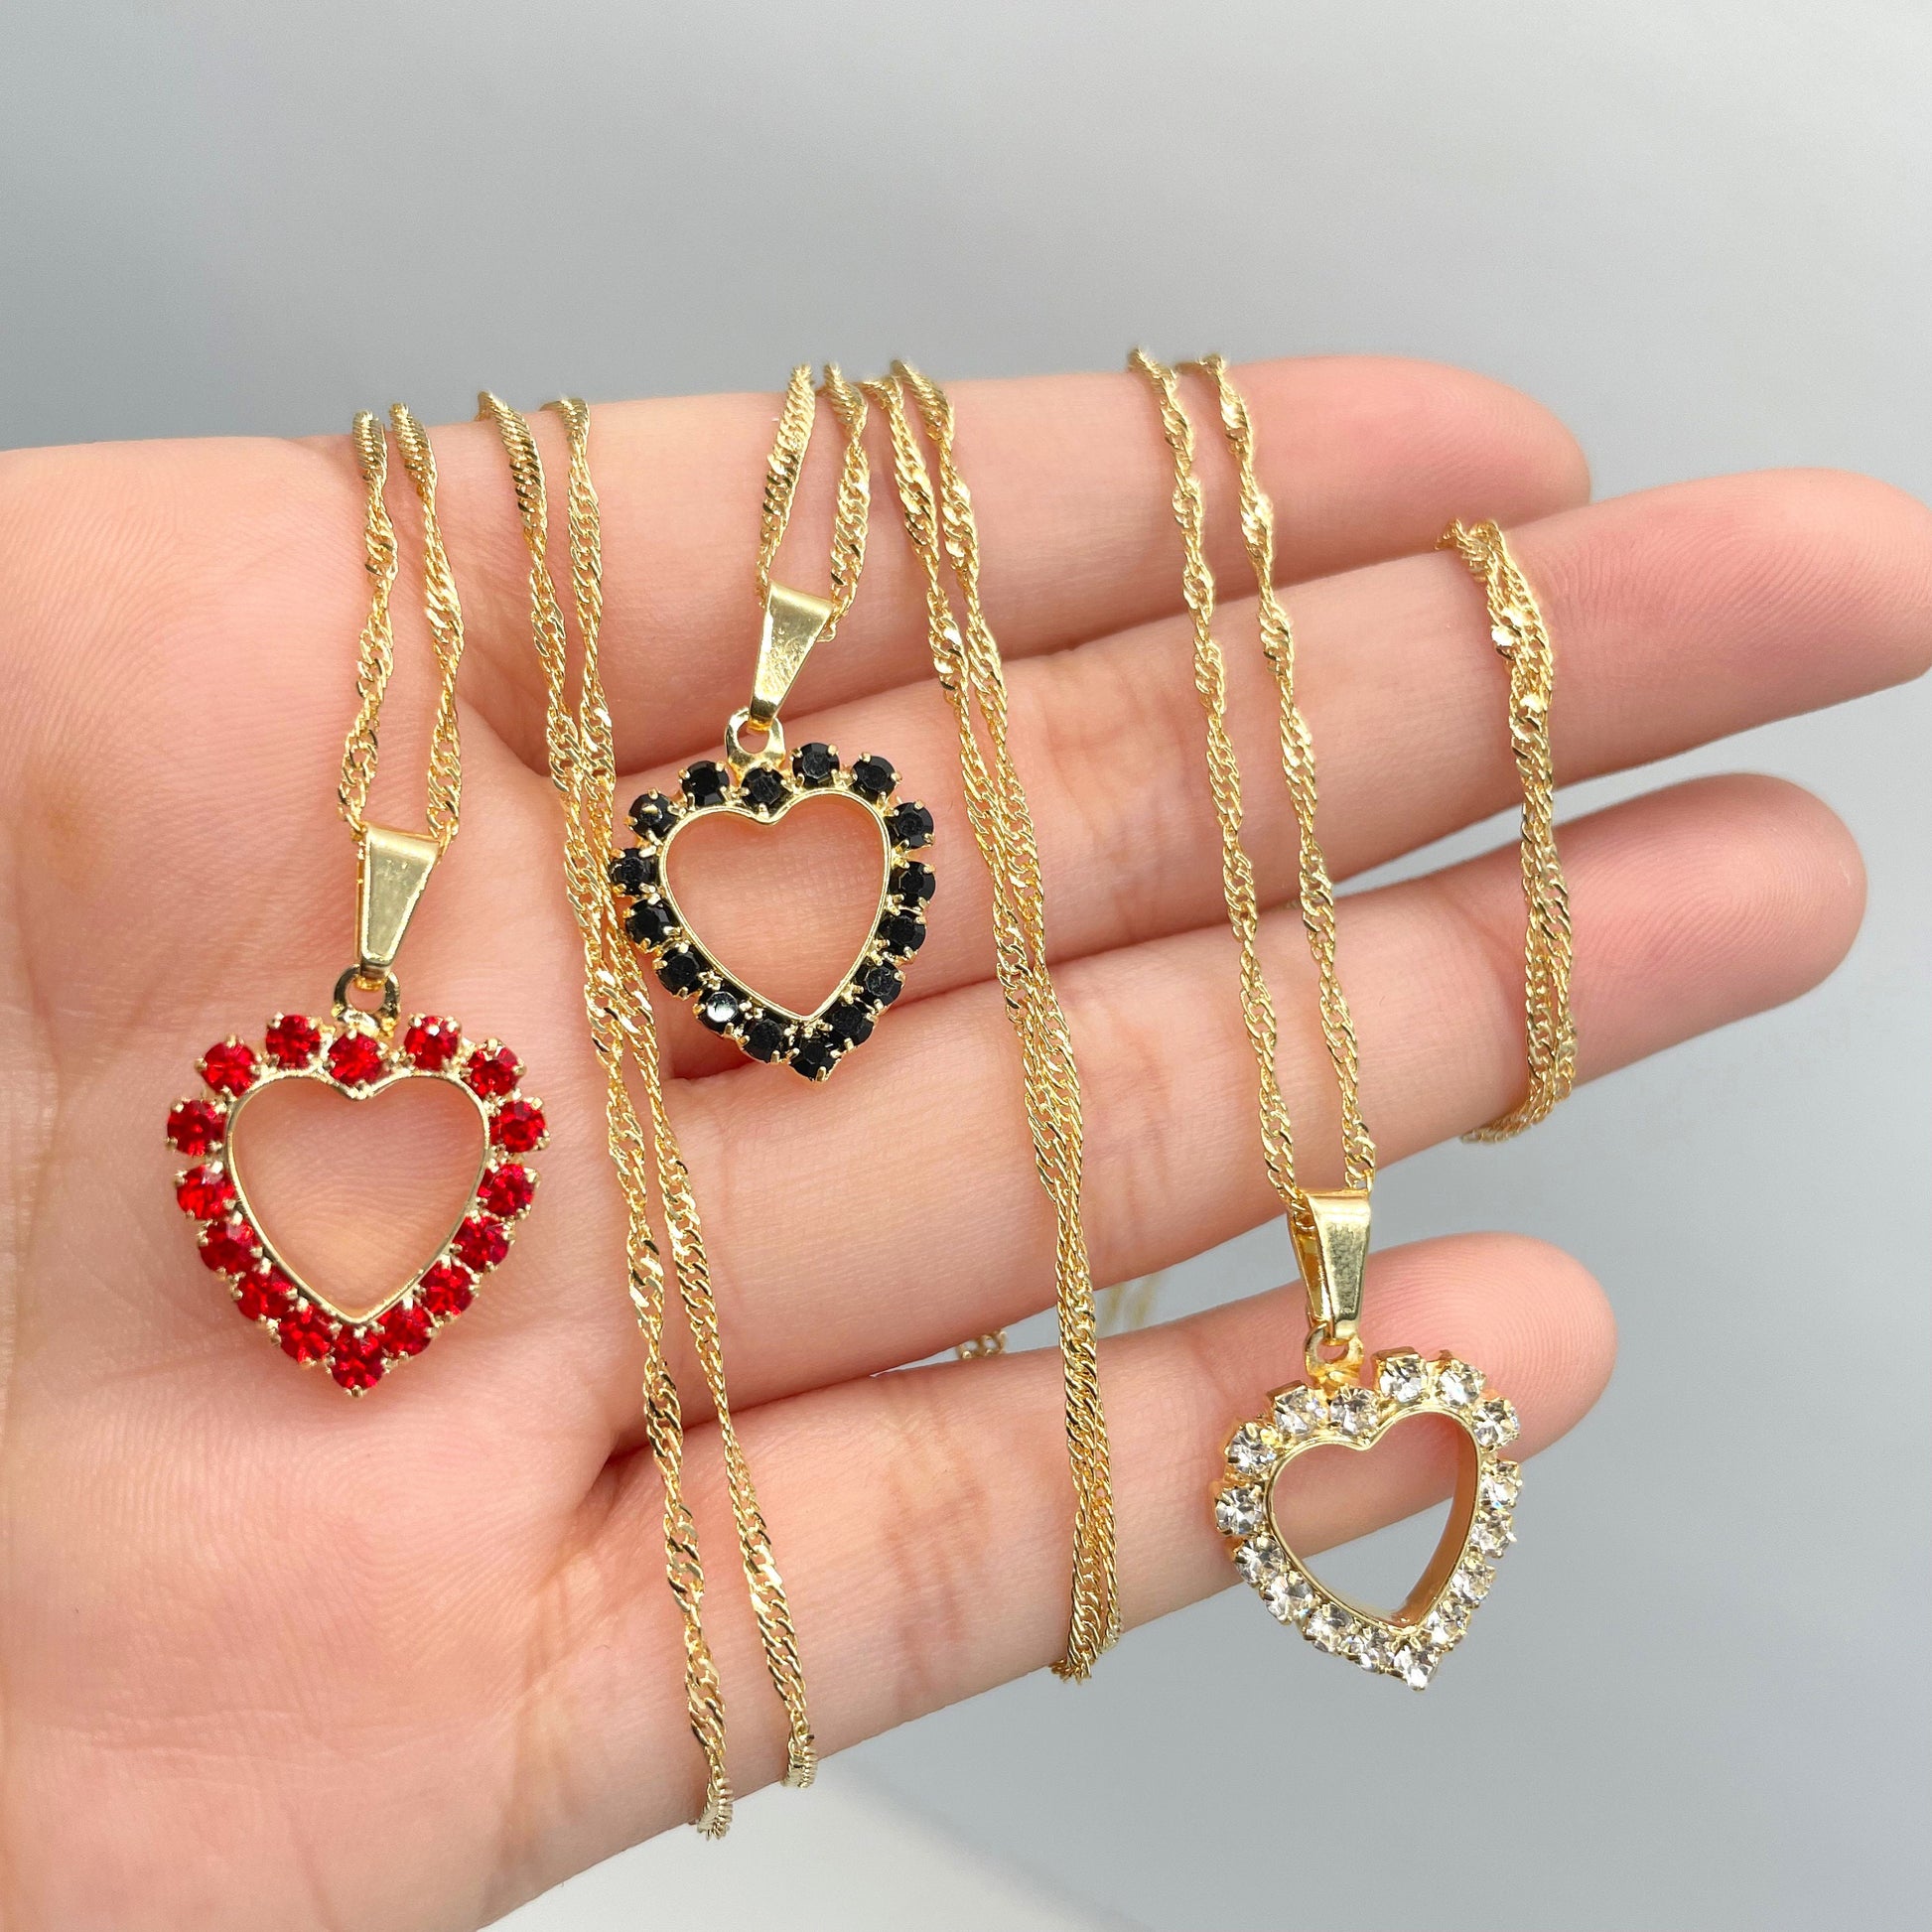 18k Gold Filled 1mm Singapore Necklace with Cubic Zirconia White, Red or Black Heart Charms, Necklace & Earrings Set Wholesale Jewelry